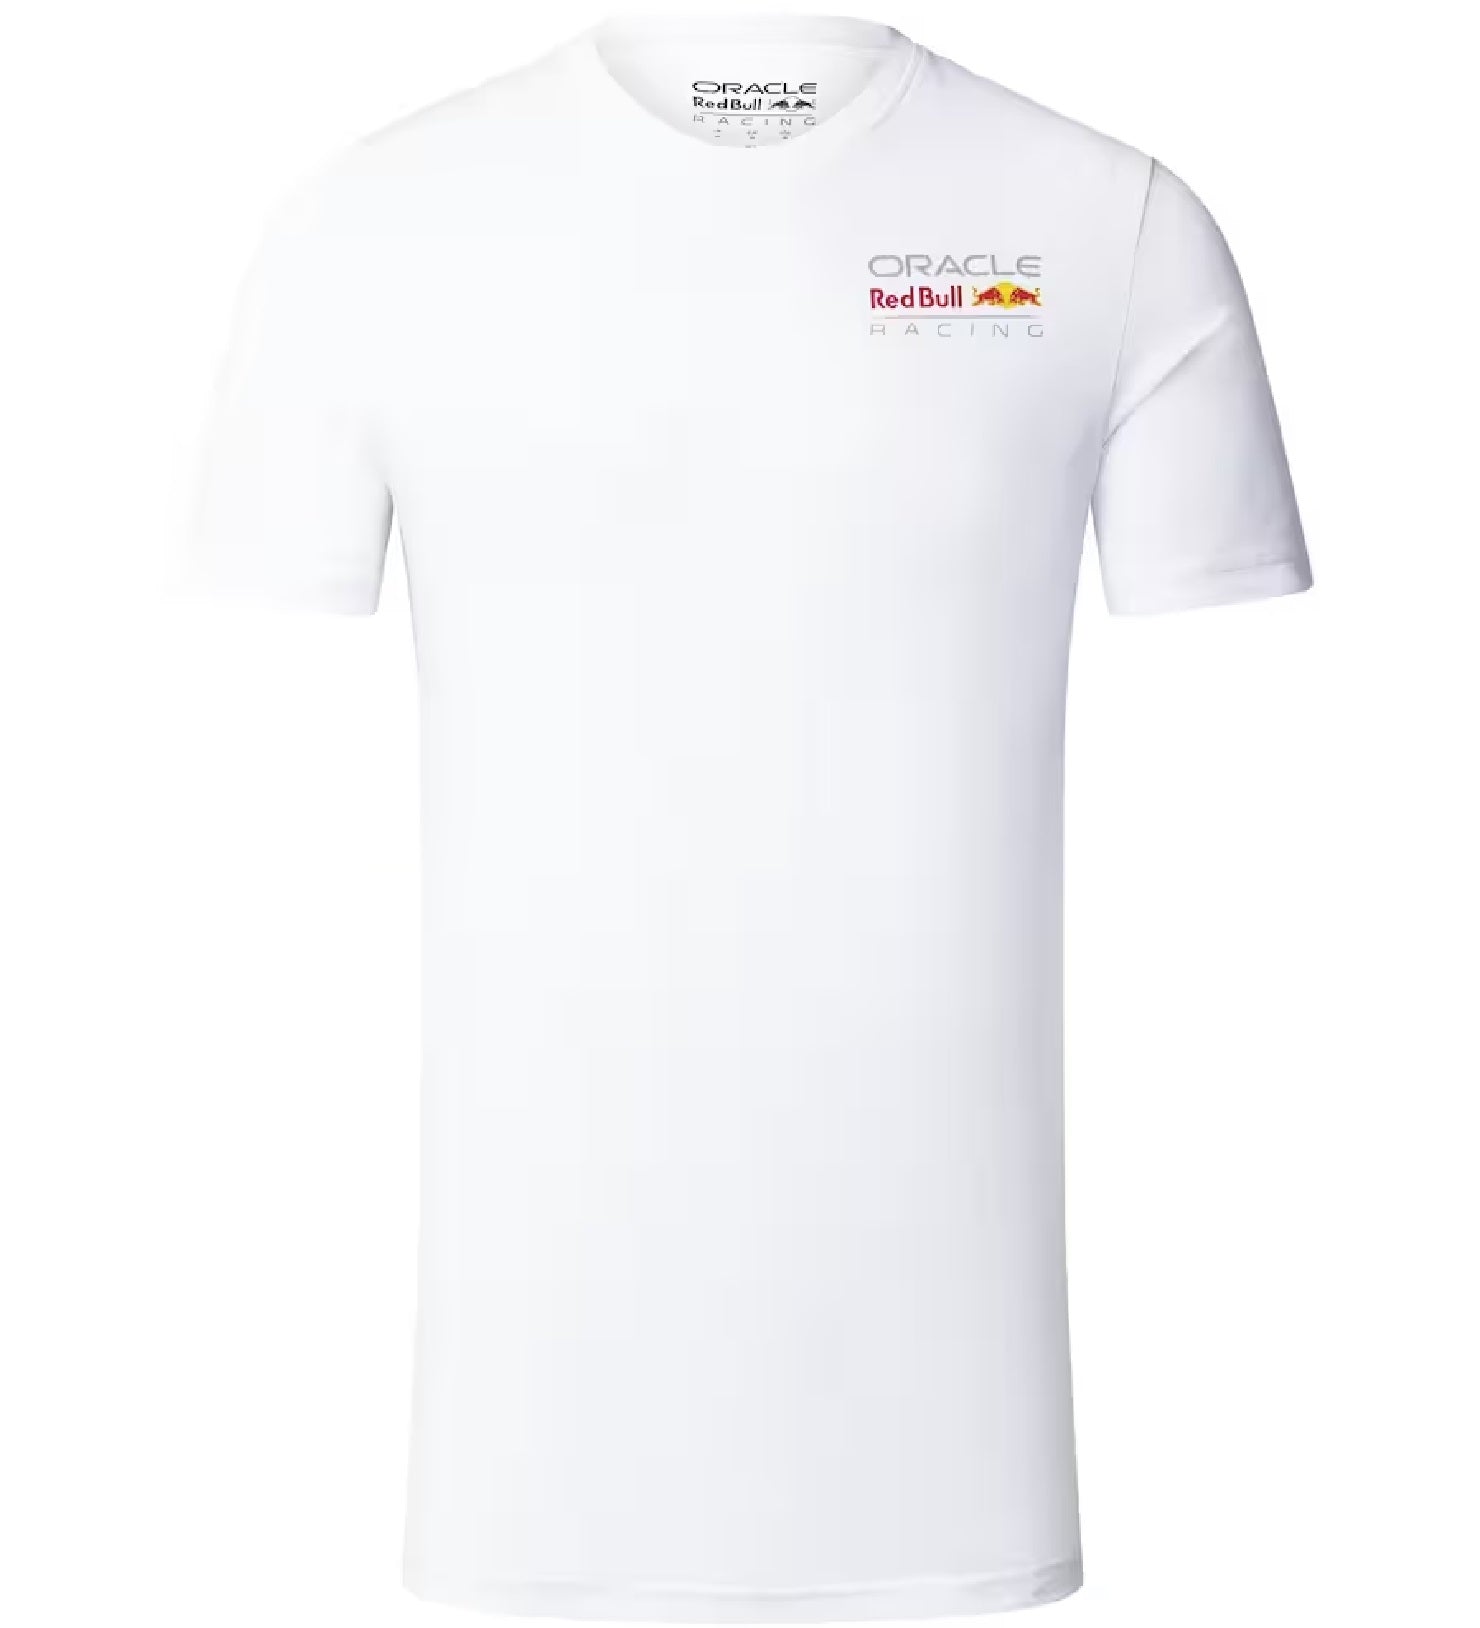 Castore Oracle T Shirt | Red Bull Racing Shirt | Formula 1 Driver T Shirts | F1 Clothing | Color White | Best Wearing in Bahrain | Halabh.com